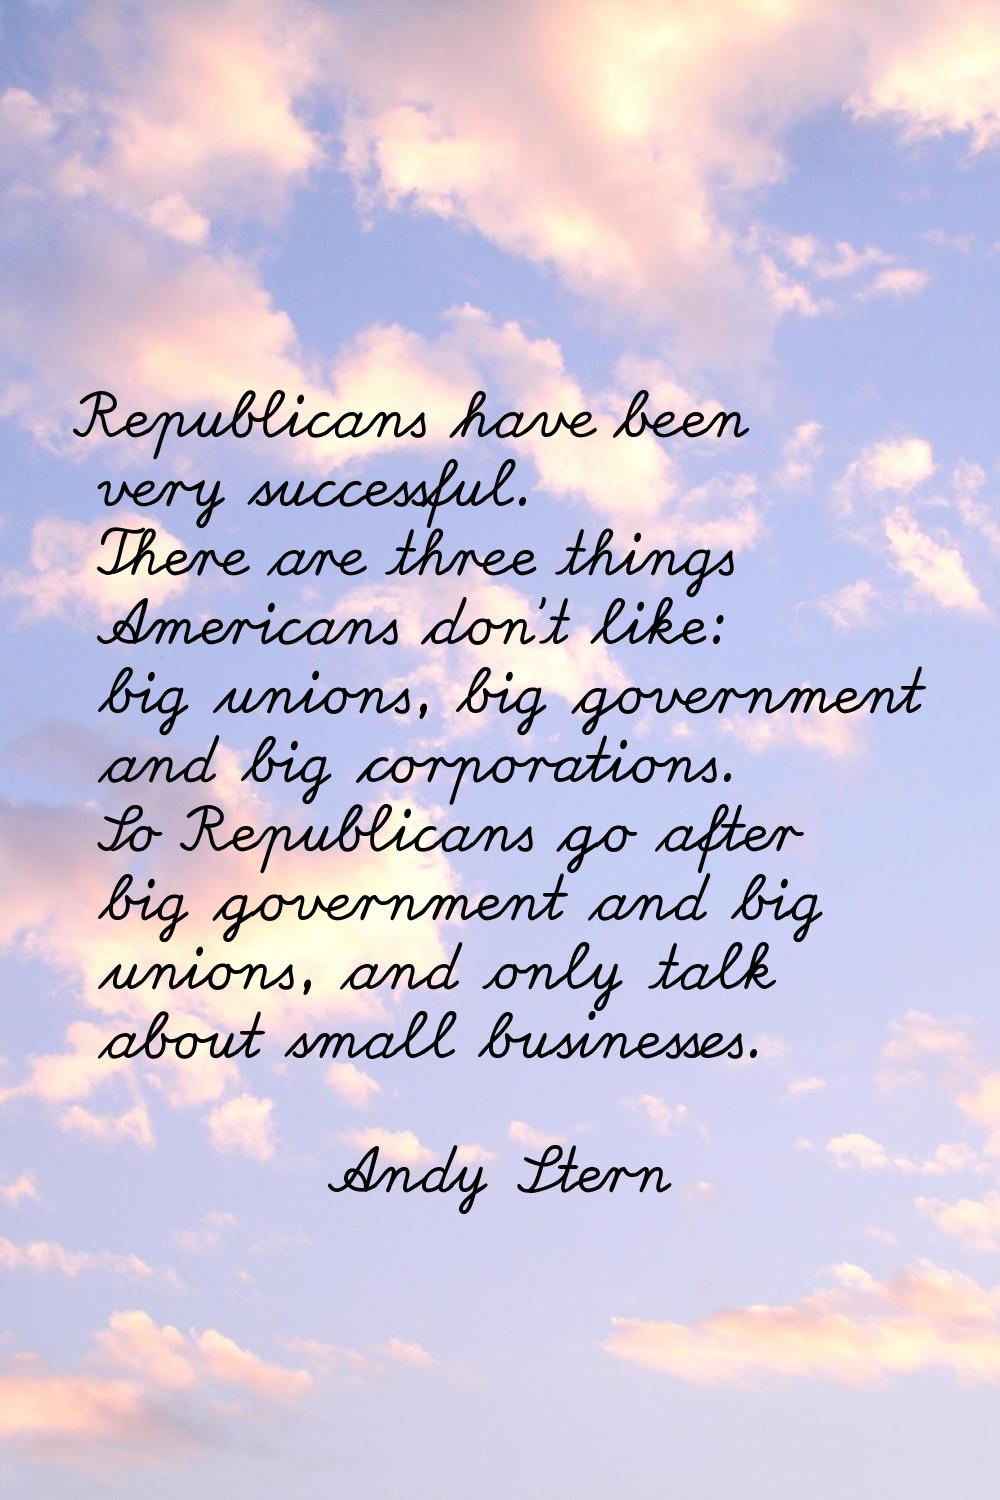 Republicans have been very successful. There are three things Americans don't like: big unions, big